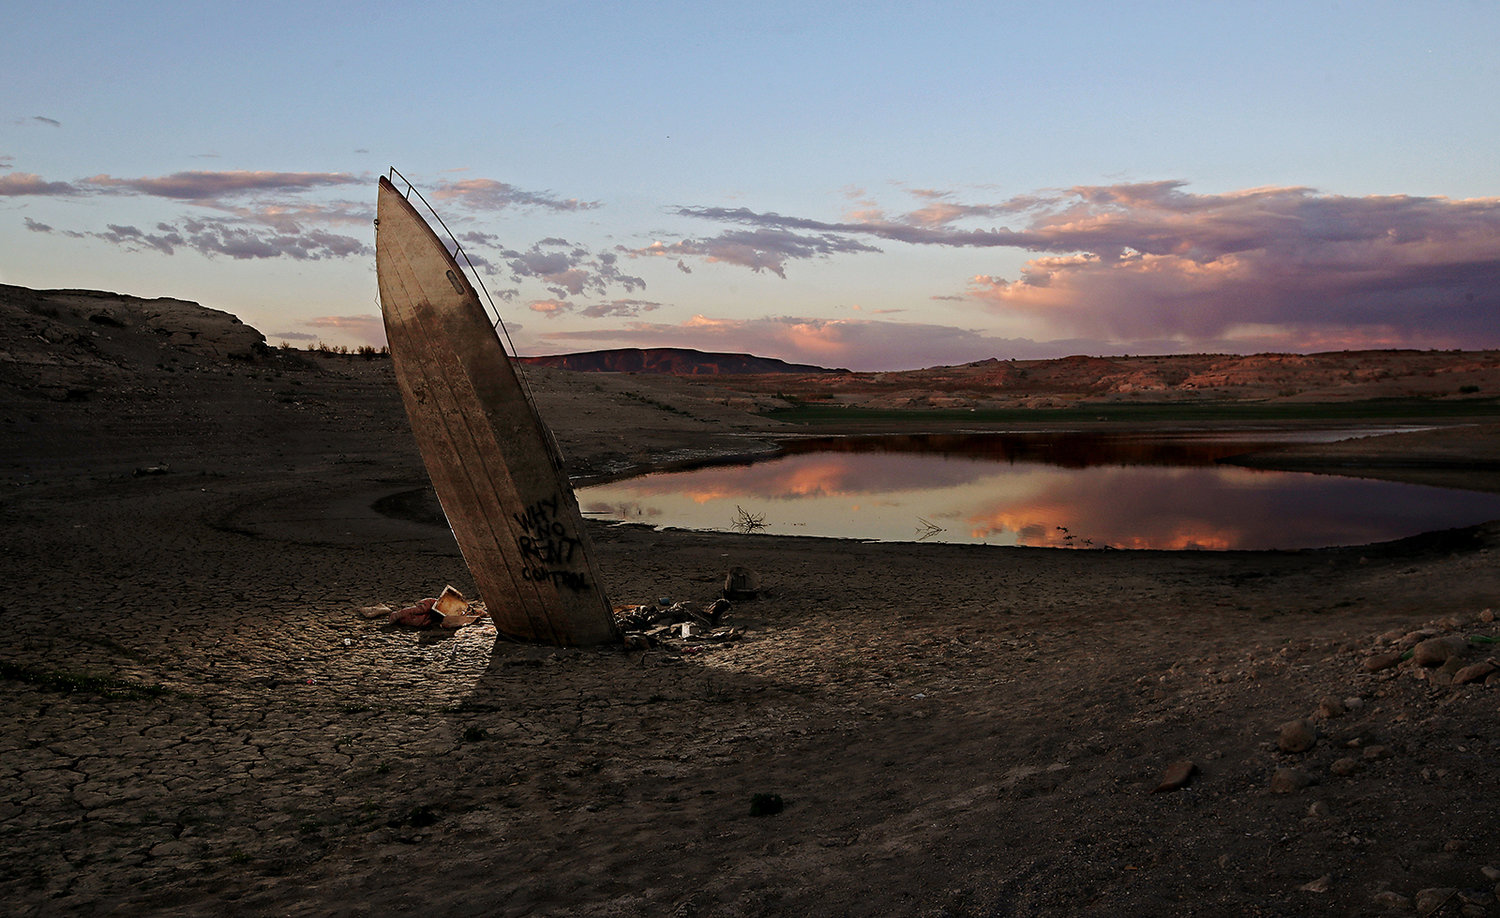 A sunken sailboat is among the years of accumulated detritus that has been exposed as water levels in Lake Mead, the nation’s largest reservoir, have dropped to 30% of capacity after almost two decades of severe drought conditions in the American West. (Luis Sinco/Los Angeles Times/TNS)